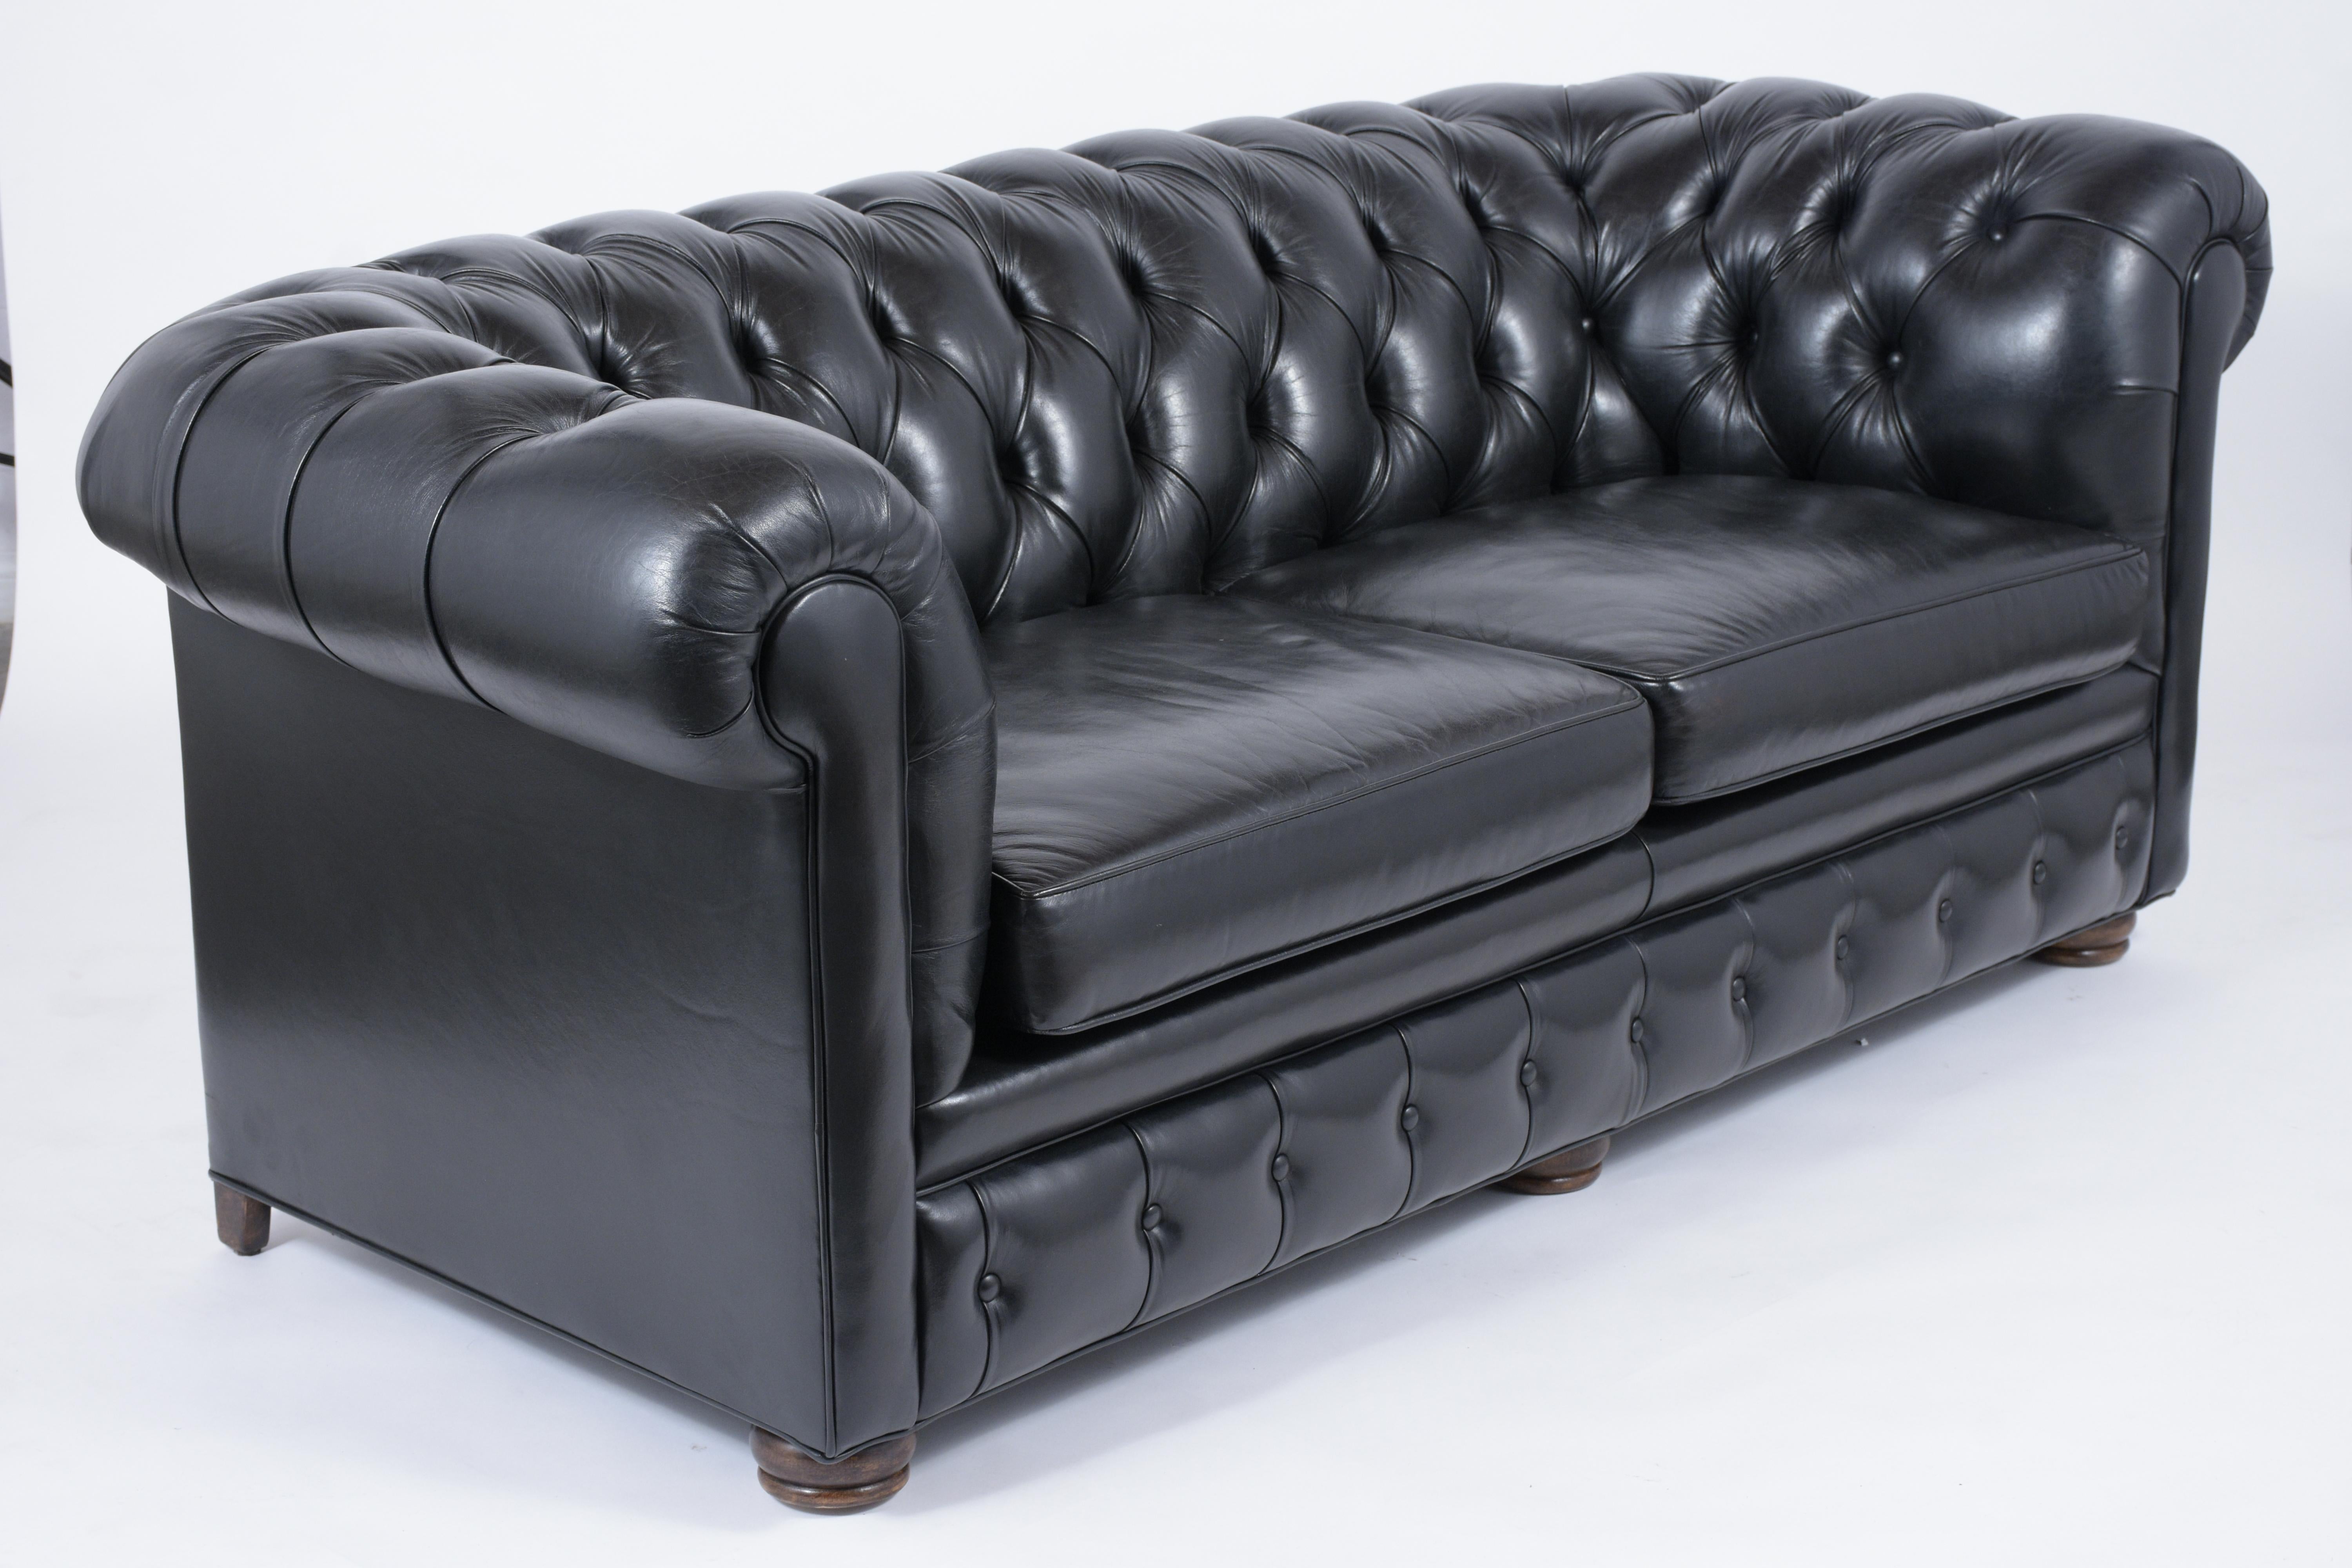 Late 20th Century Chesterfield Tufted Leather Sofa